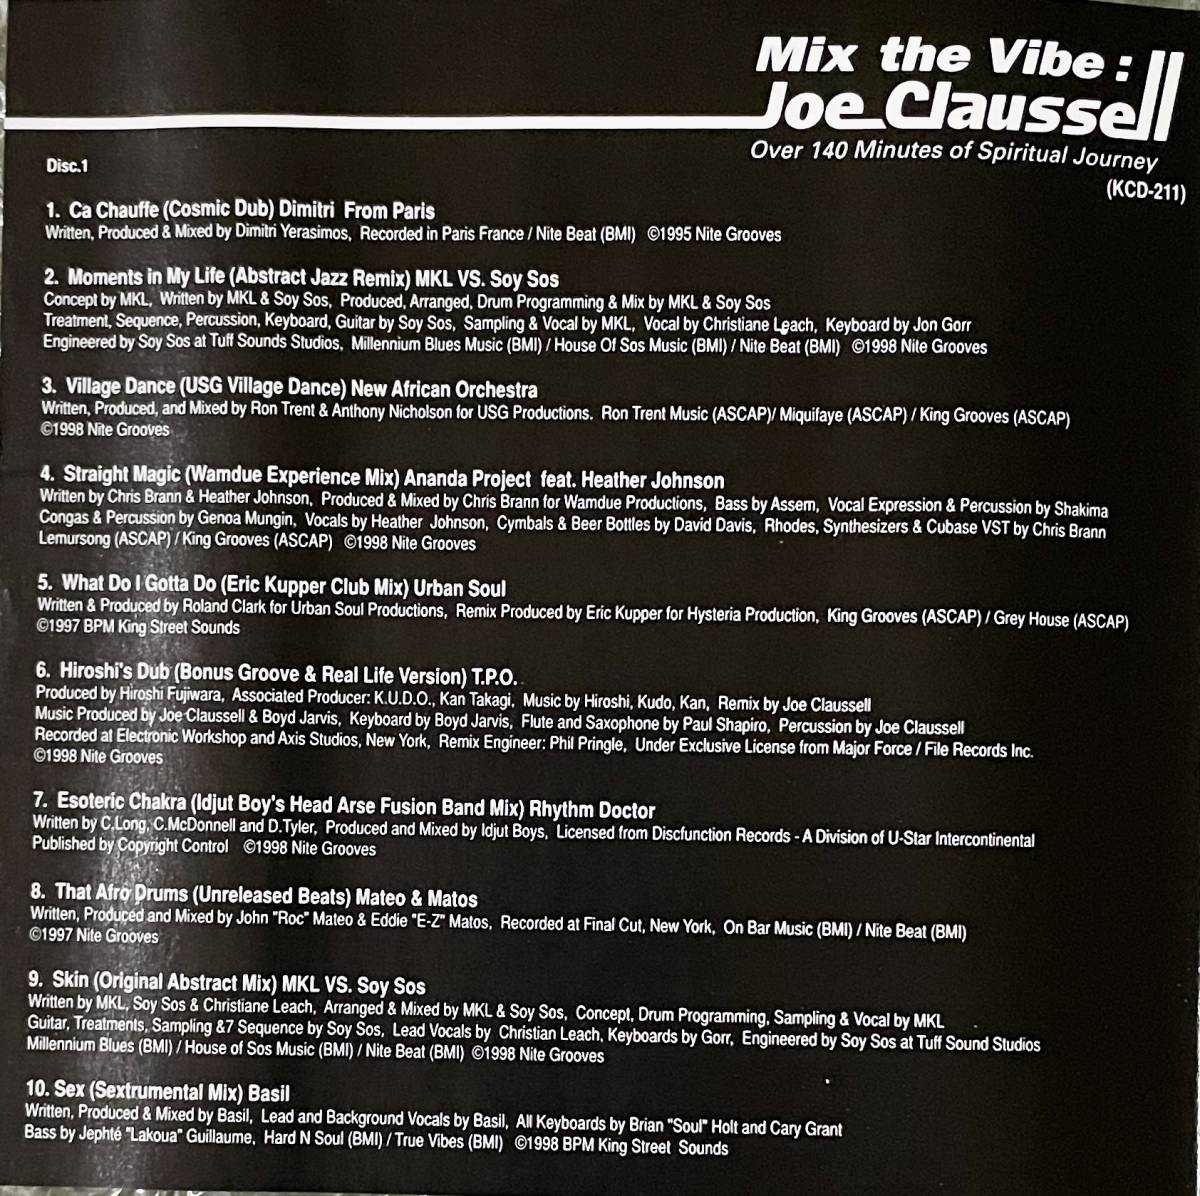 45s Joe Claussell Mix The Vibe 2枚組 Joe Claussell (Over 140 Minutes Of Spiritual Journey) Afro Deep House Garage House 中古品_画像3